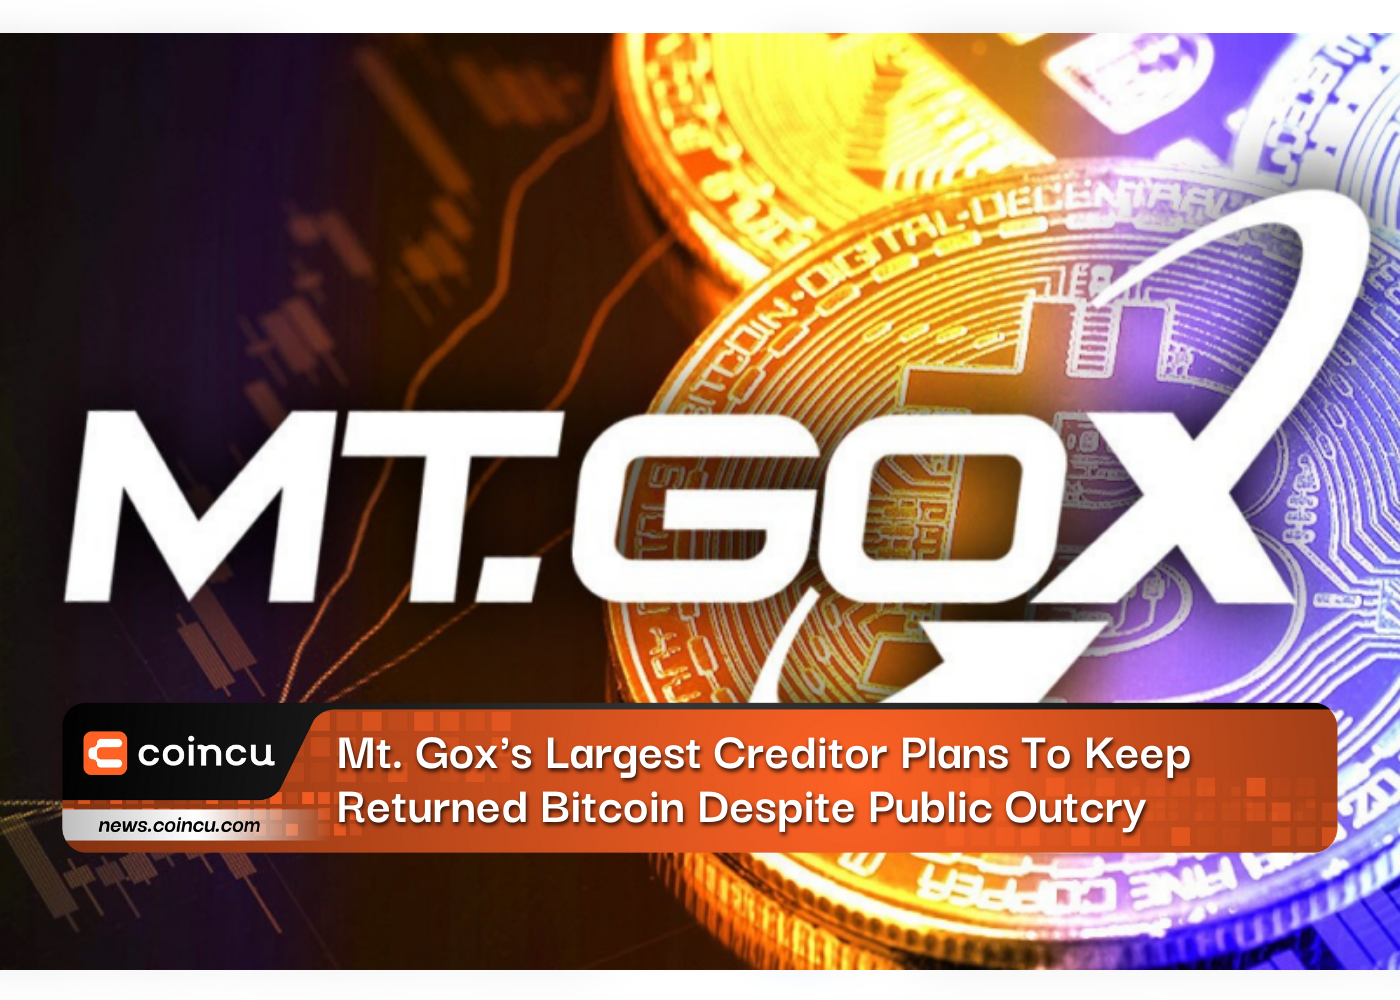 Mt. Gox's Largest Creditor Plans To Keep Returned Bitcoin Despite Public Outcry